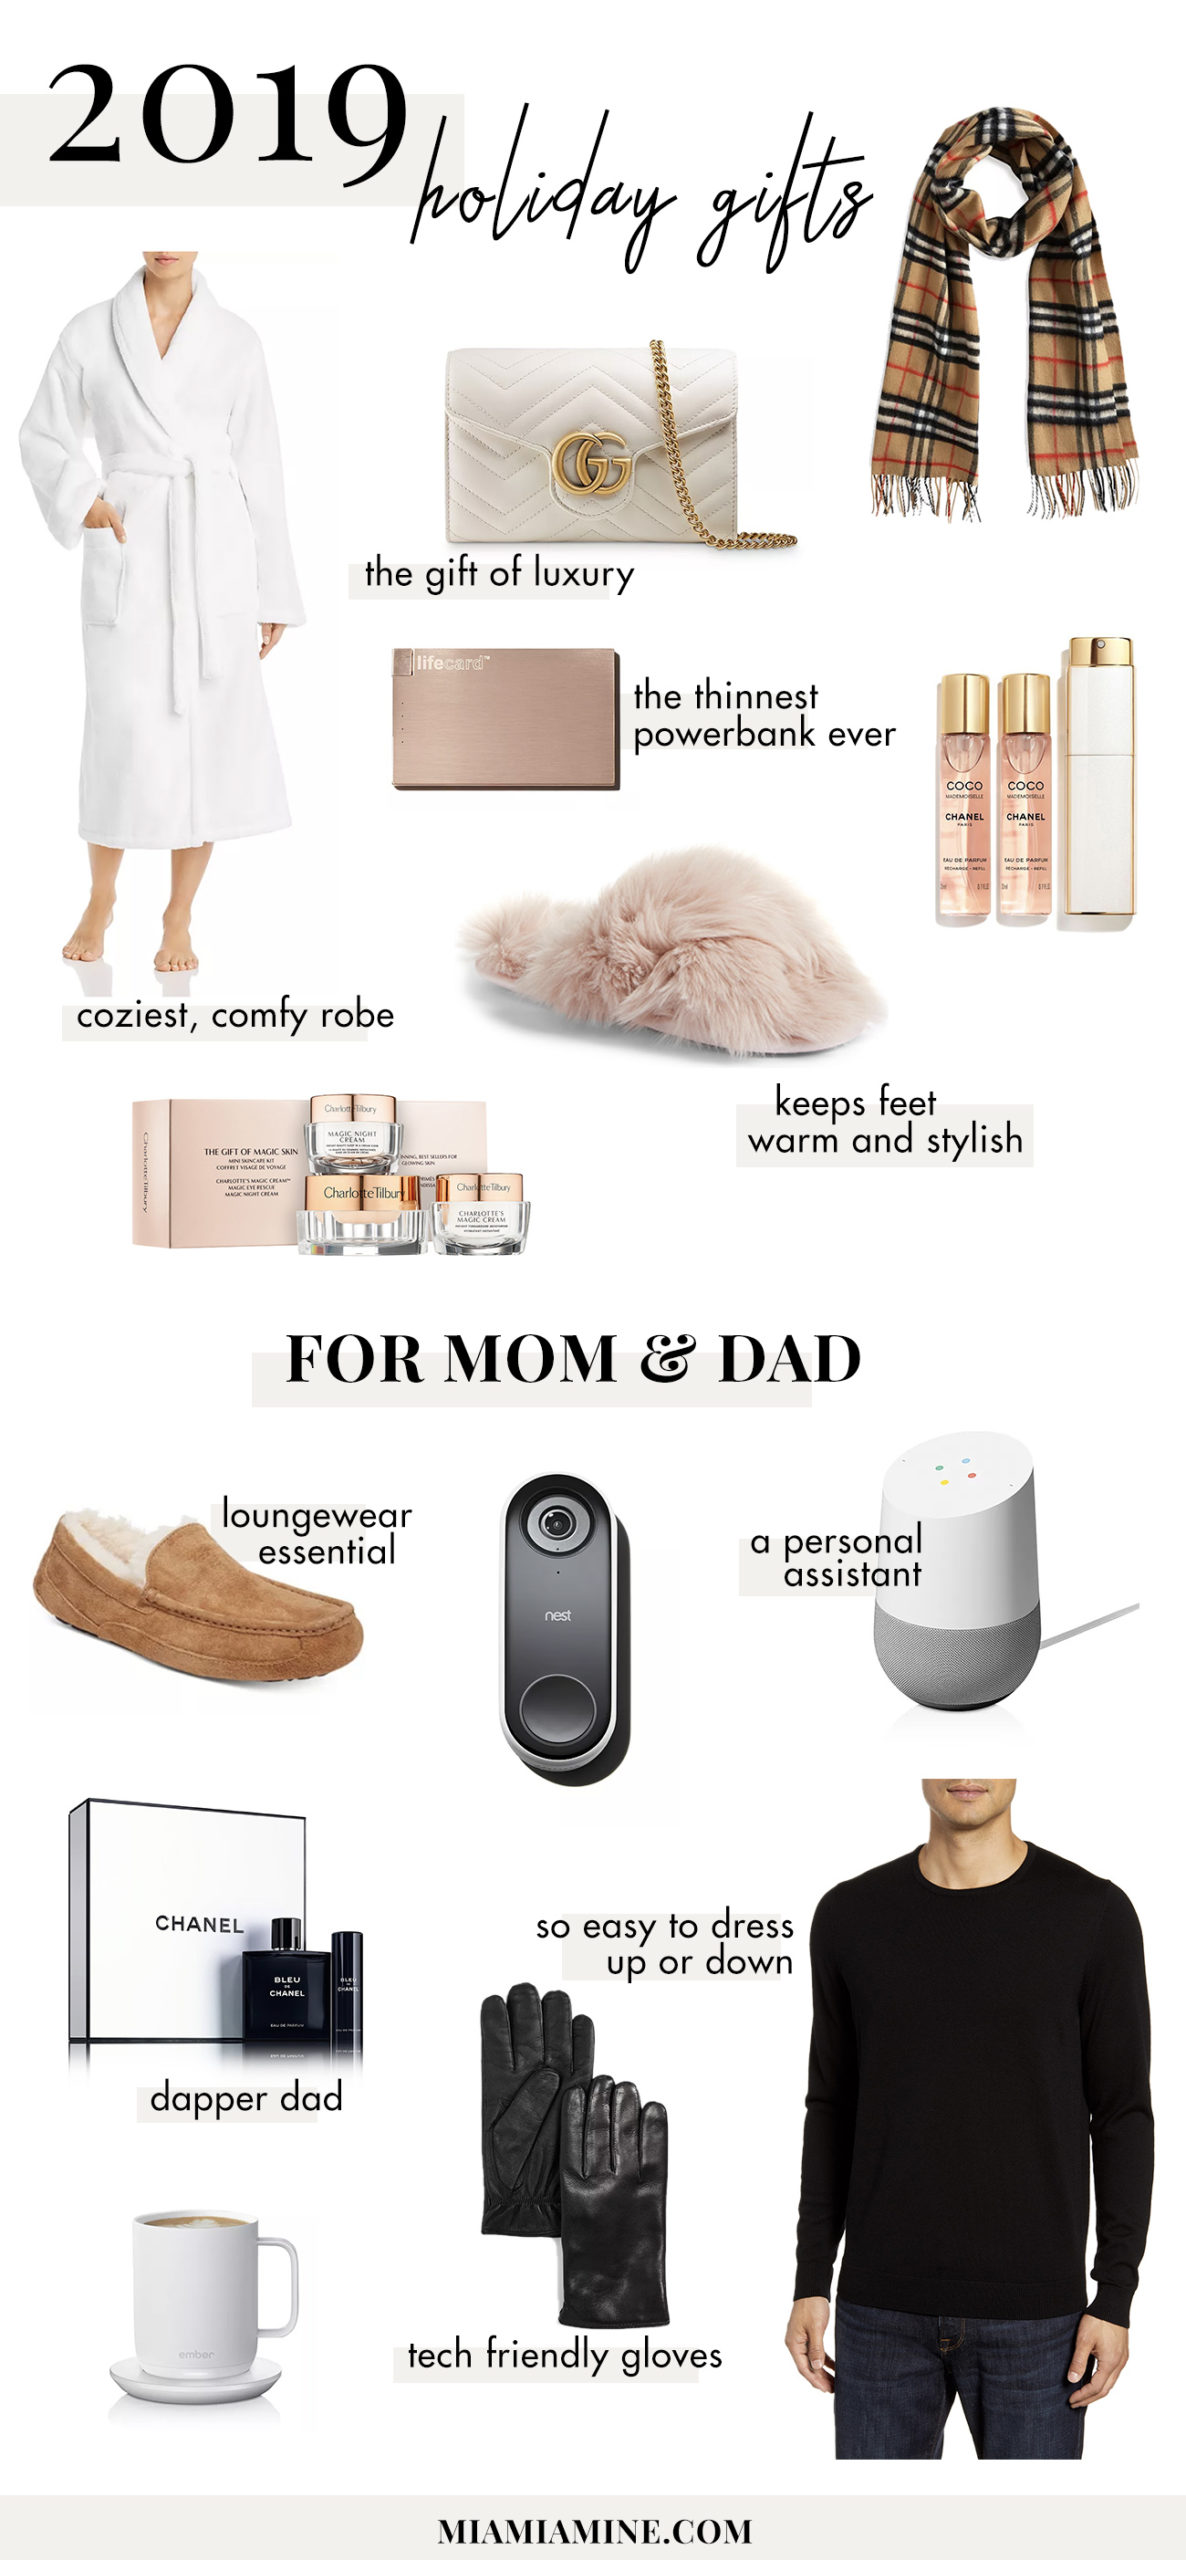 https://www.miamiamine.com/wp-content/uploads/2019/11/holiday-gift-ideas-for-mom-and-dad-scaled.jpg